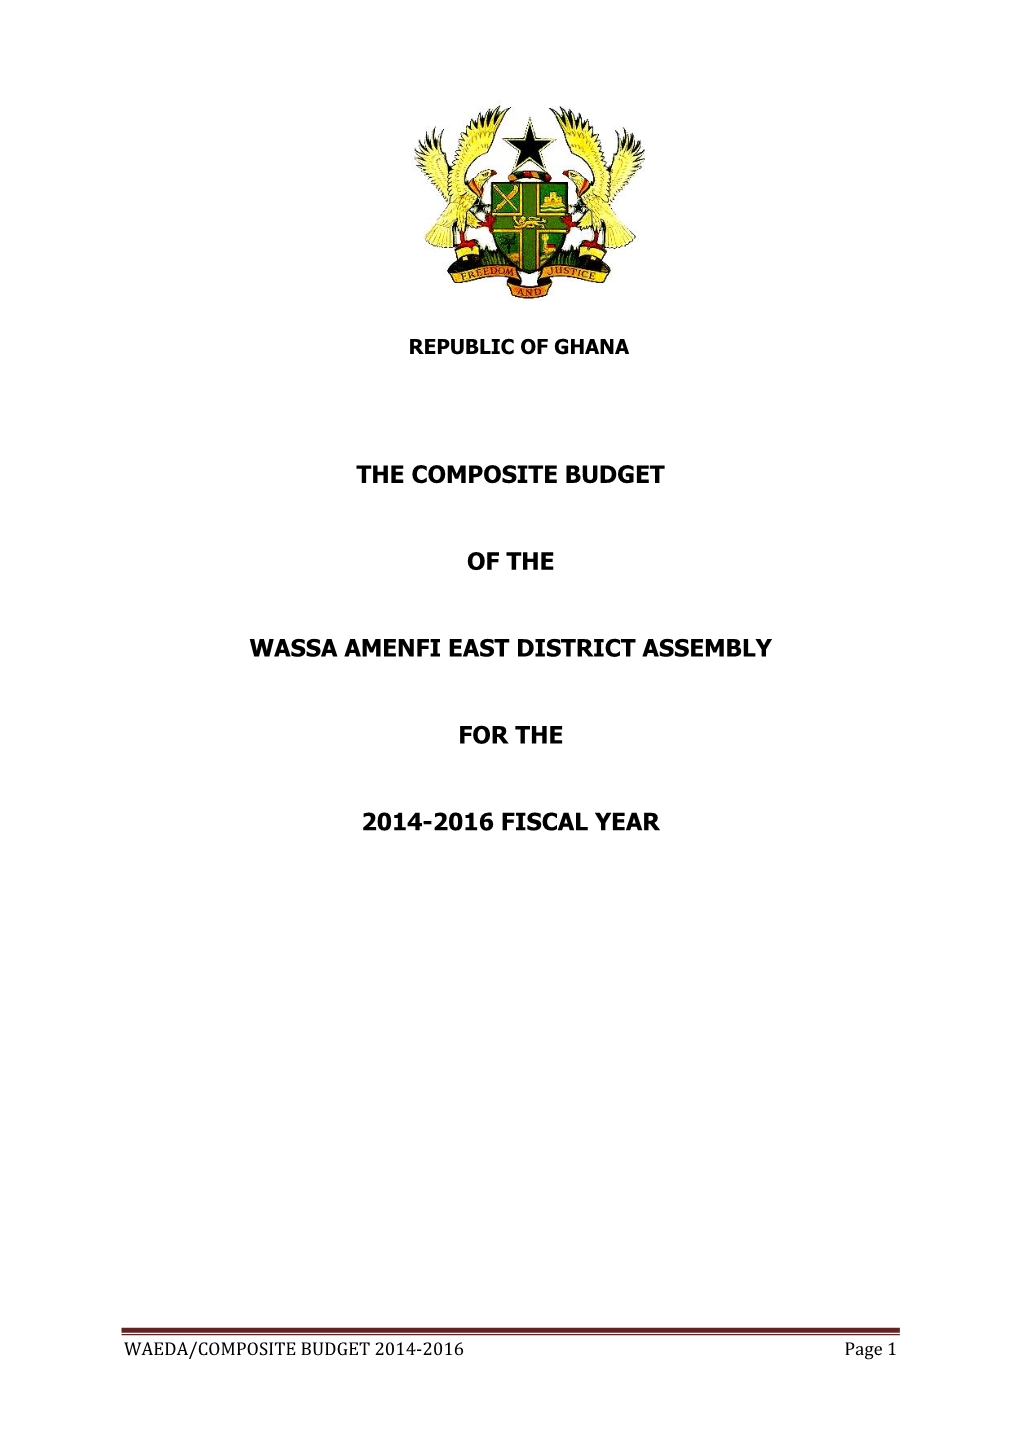 The Composite Budget of the Wassa Amenfi East District Assembly for The